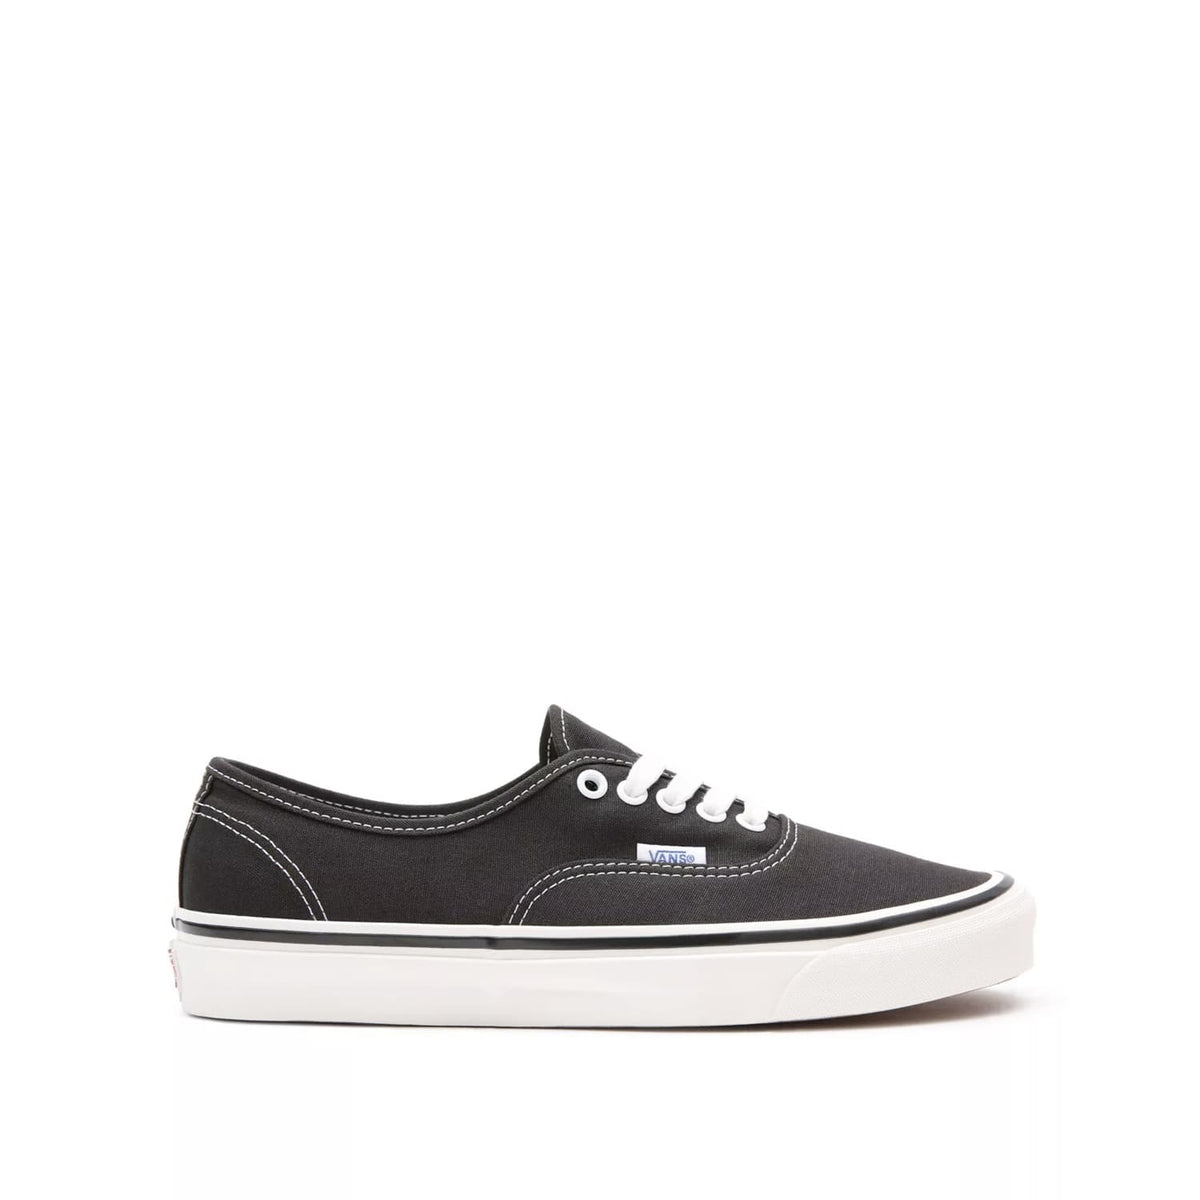 Vans Authentic 44 DX - Anaheim Factory in Black / White Check